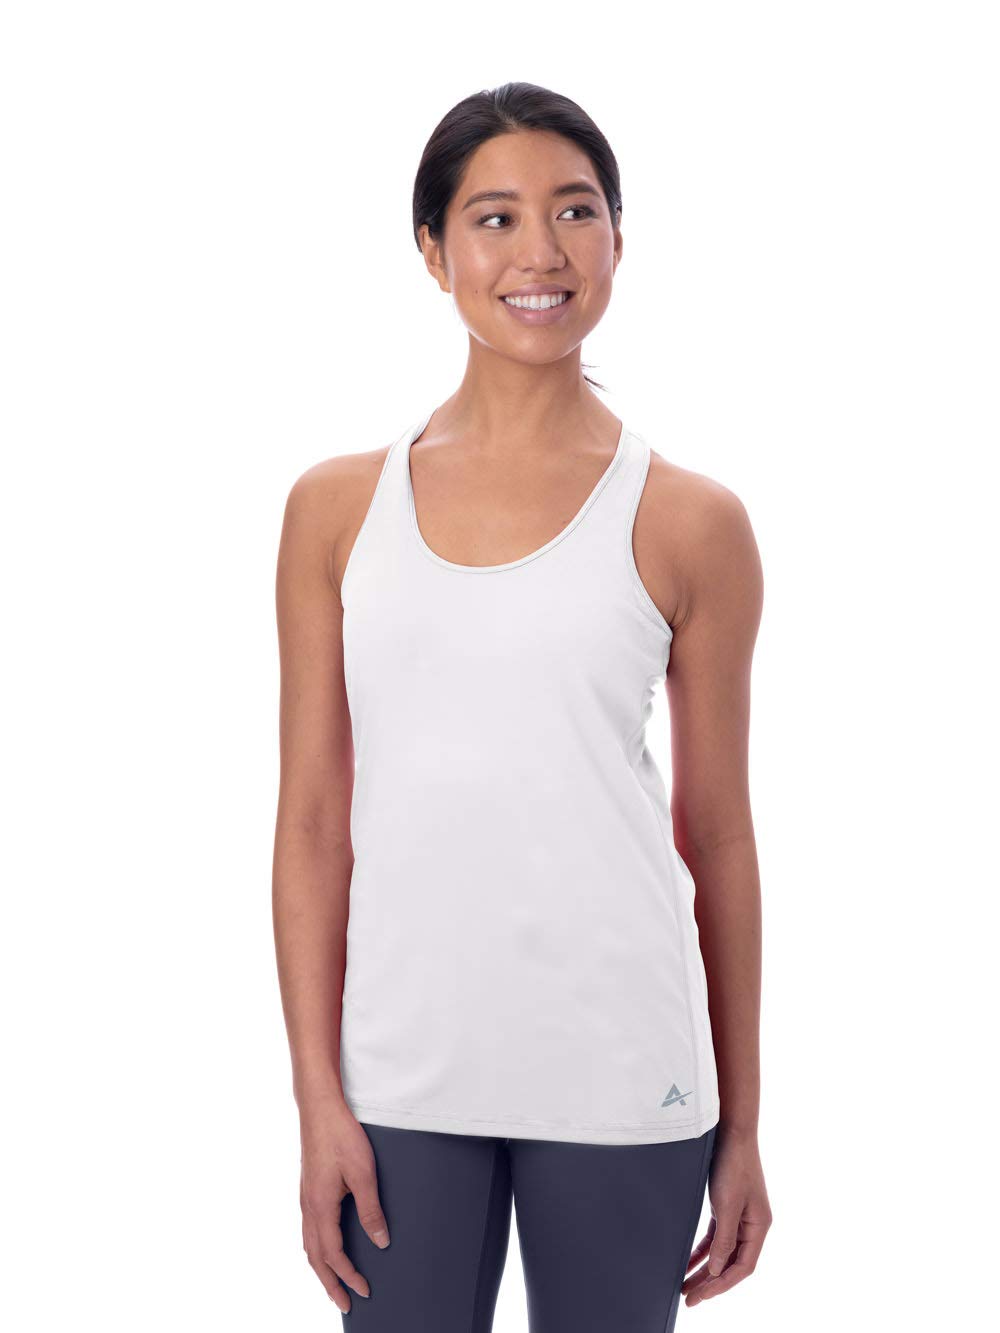 Arctic Cool Women's Tank Instant Cooling Moisture Wicking Performance ...